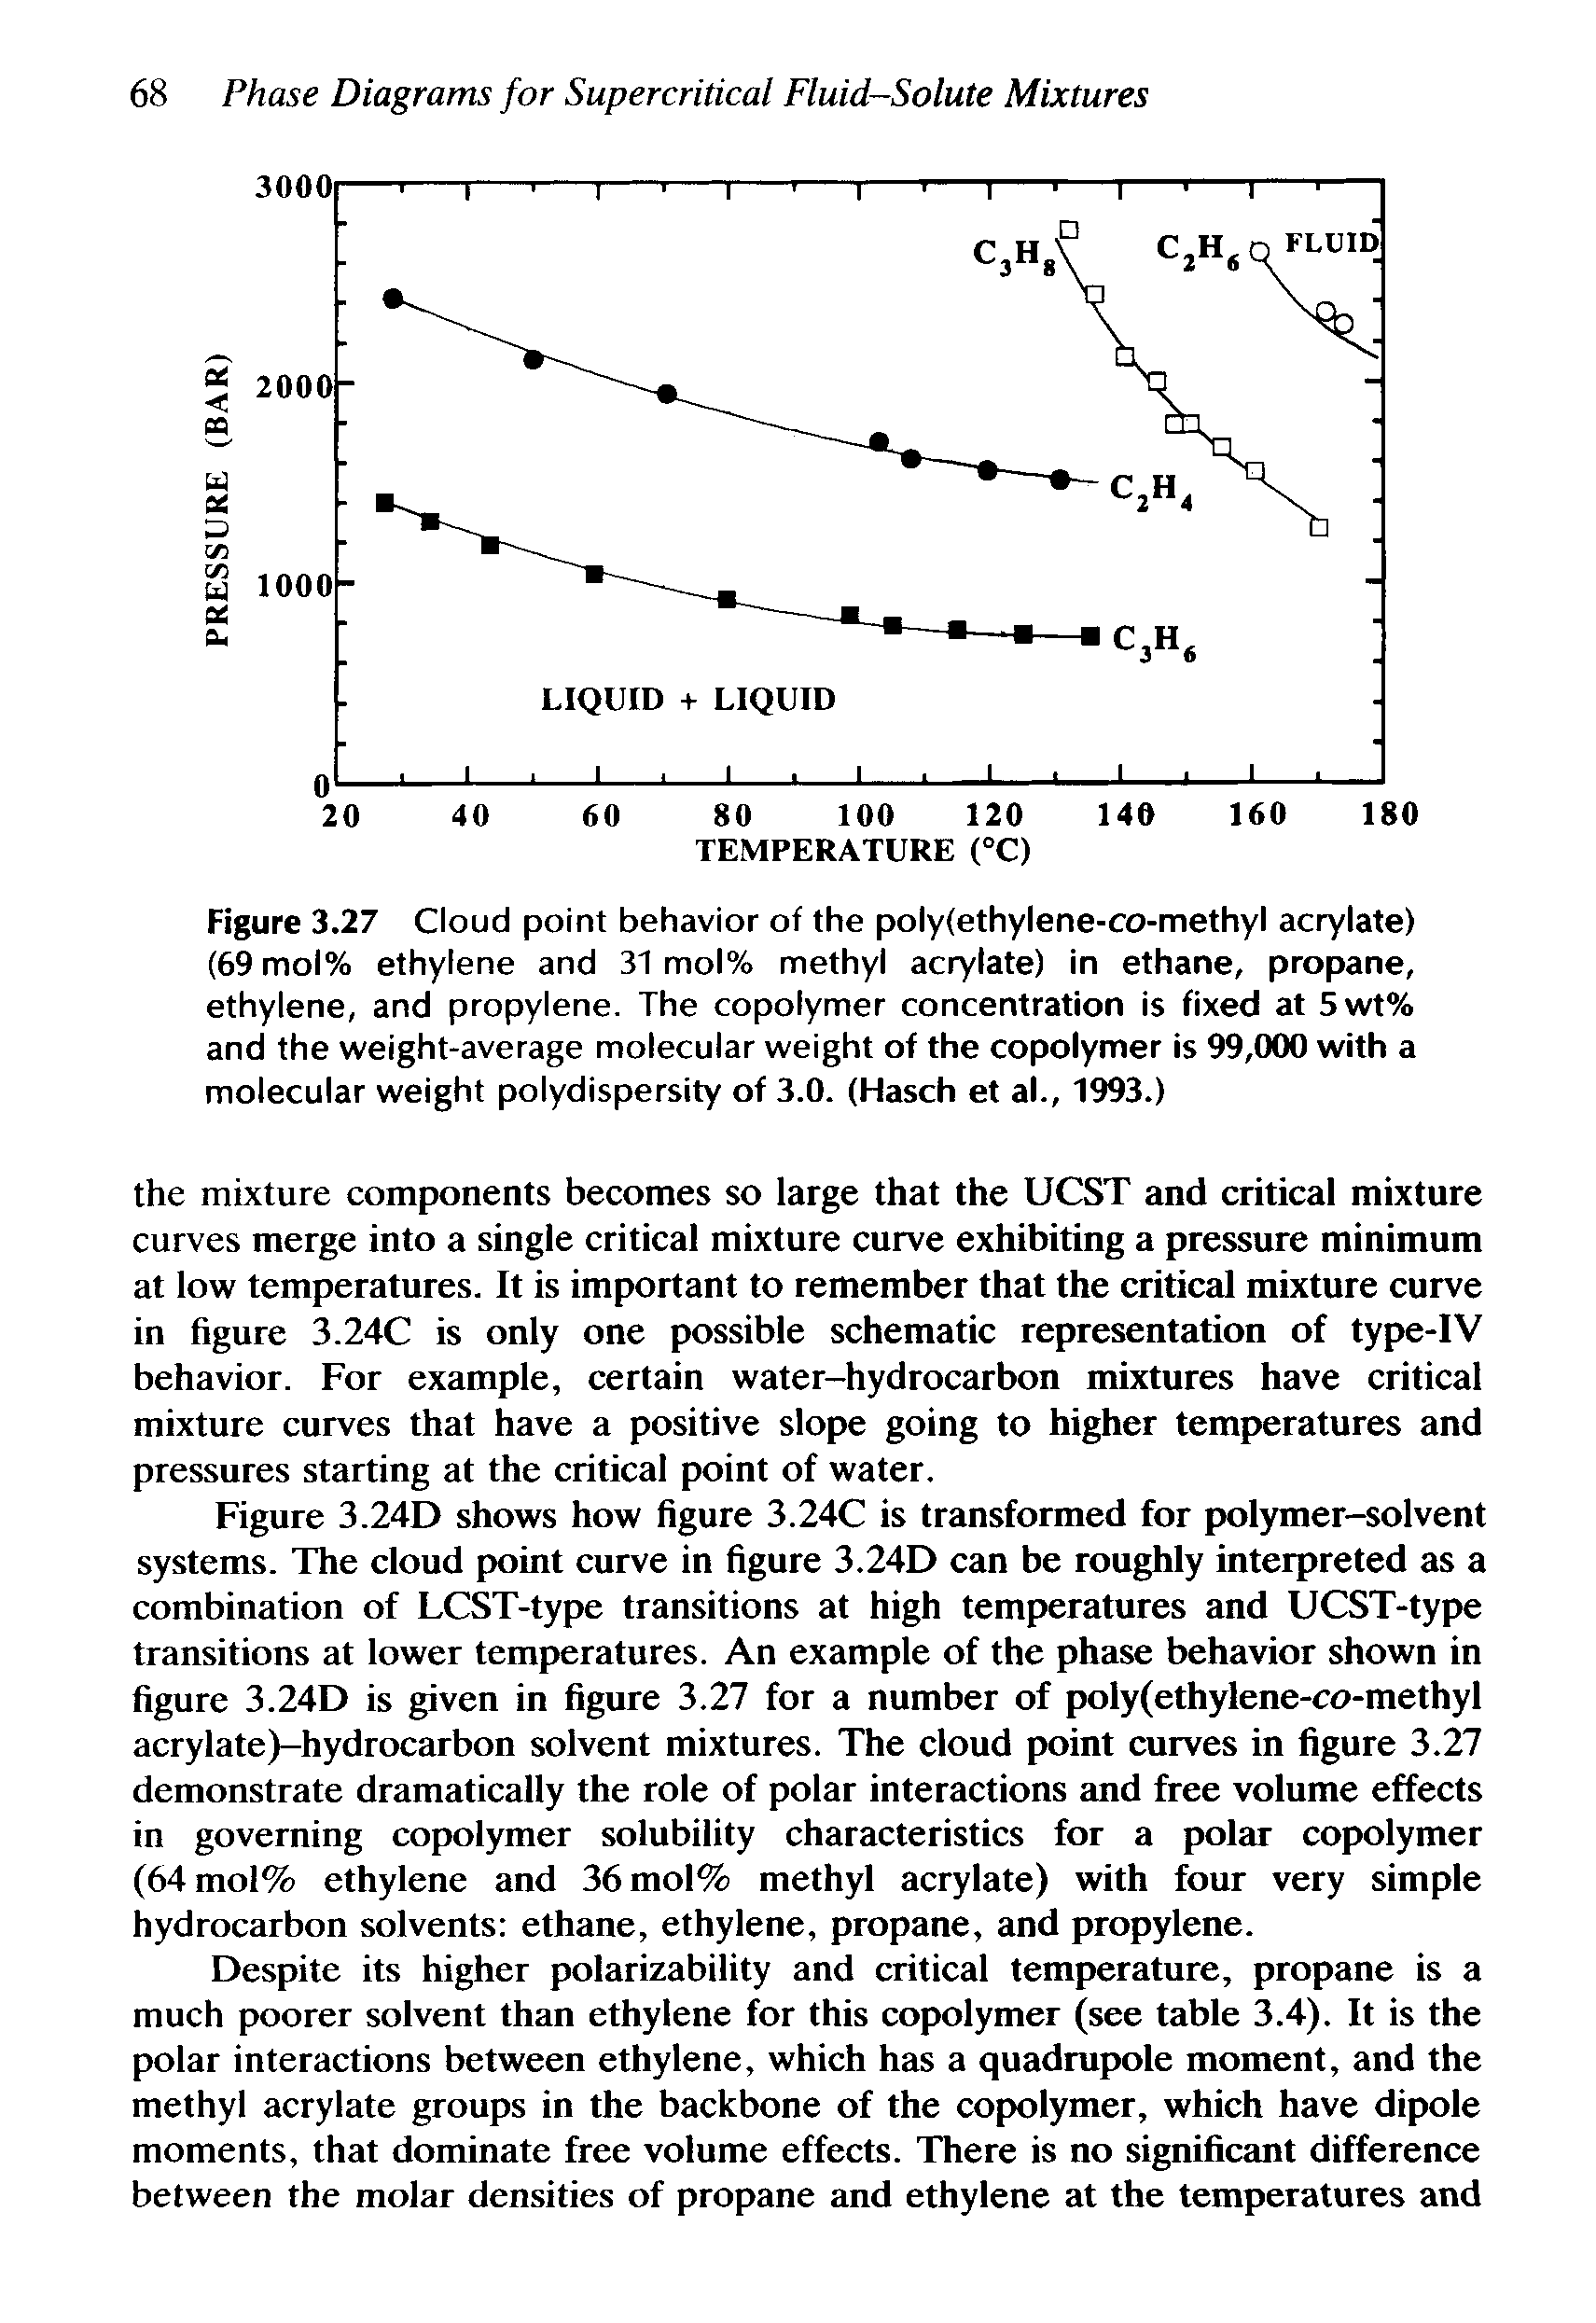 Figure 3.27 Cloud point behavior of the poly(ethylene-co-methyl acrylate) (69 mol% ethylene and 31 mol% methyl acrylate) in ethane, propane, ethylene, and propylene. The copolymer concentration is fixed at 5wt% and the weight-average molecular weight of the copolymer is 99,000 with a molecular weight polydispersity of 3.0. (Hasch et al., 1993.)...